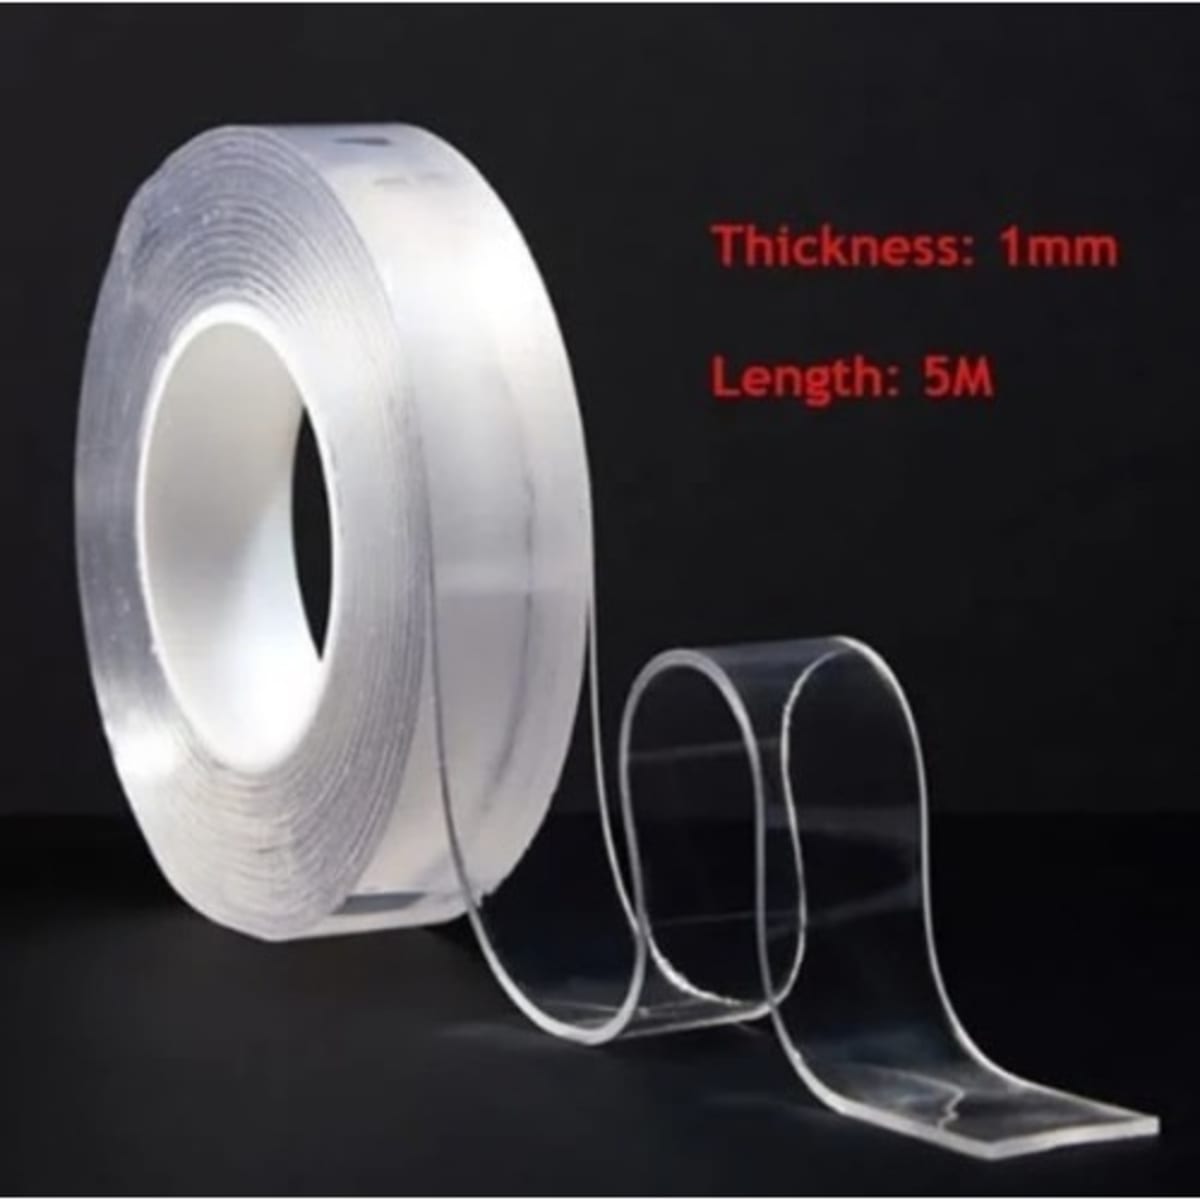 Removable and Washable Transparent Gel Tape - 5m Length, 1mm Thick